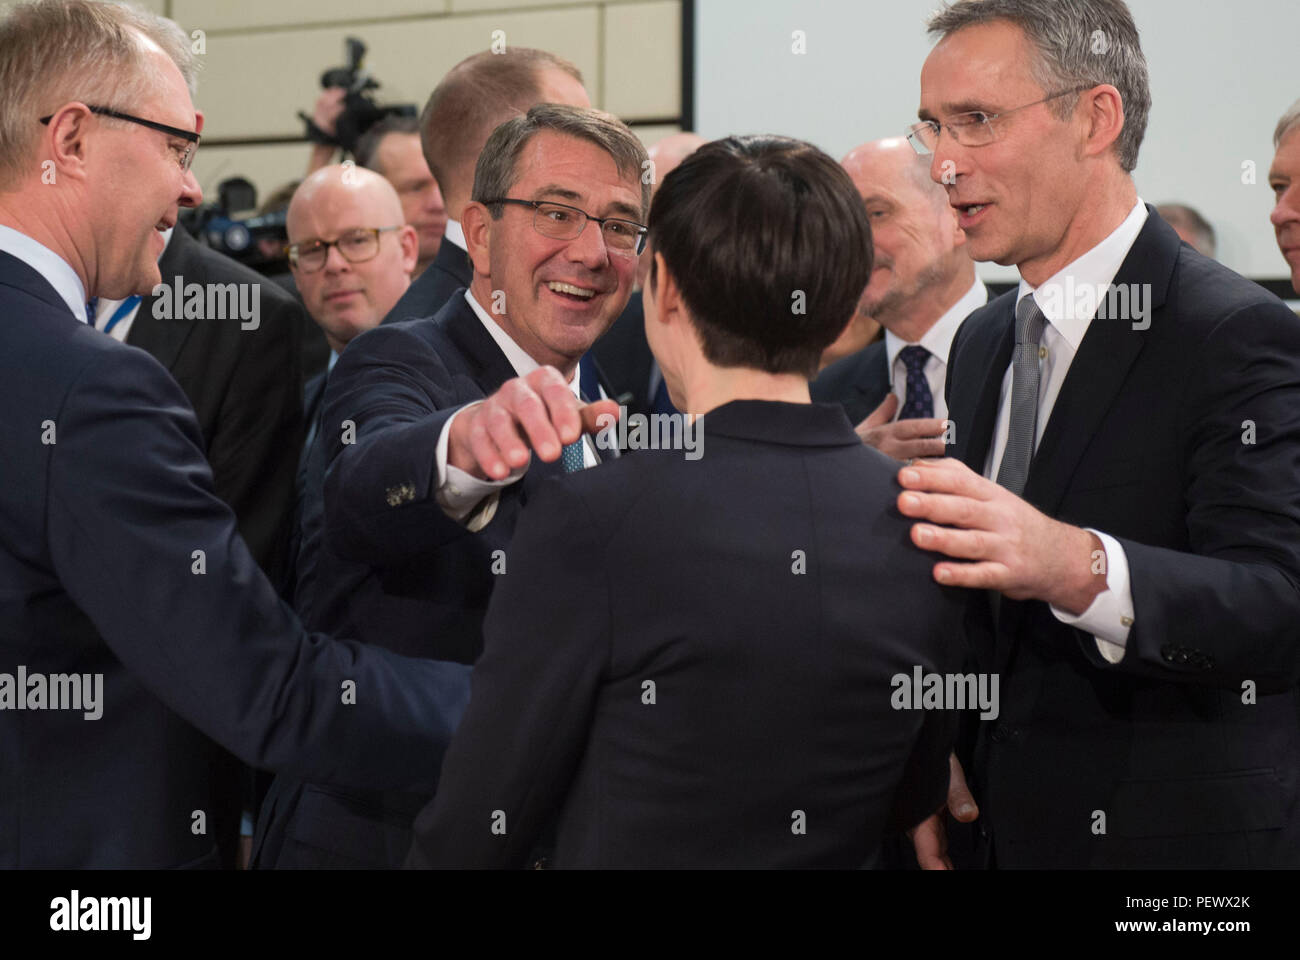 Secretary of Defense Ash Carter greets Norwegian Minister of Defense Ine Marie Eriksen Søreide as he arrives at the North Atlantic Council meeting at NATO headquarters in Brussels, Belgium, Feb. 10, 2016. (Photo by Senior Master Sgt. Adrian Cadiz)(Released) Stock Photo